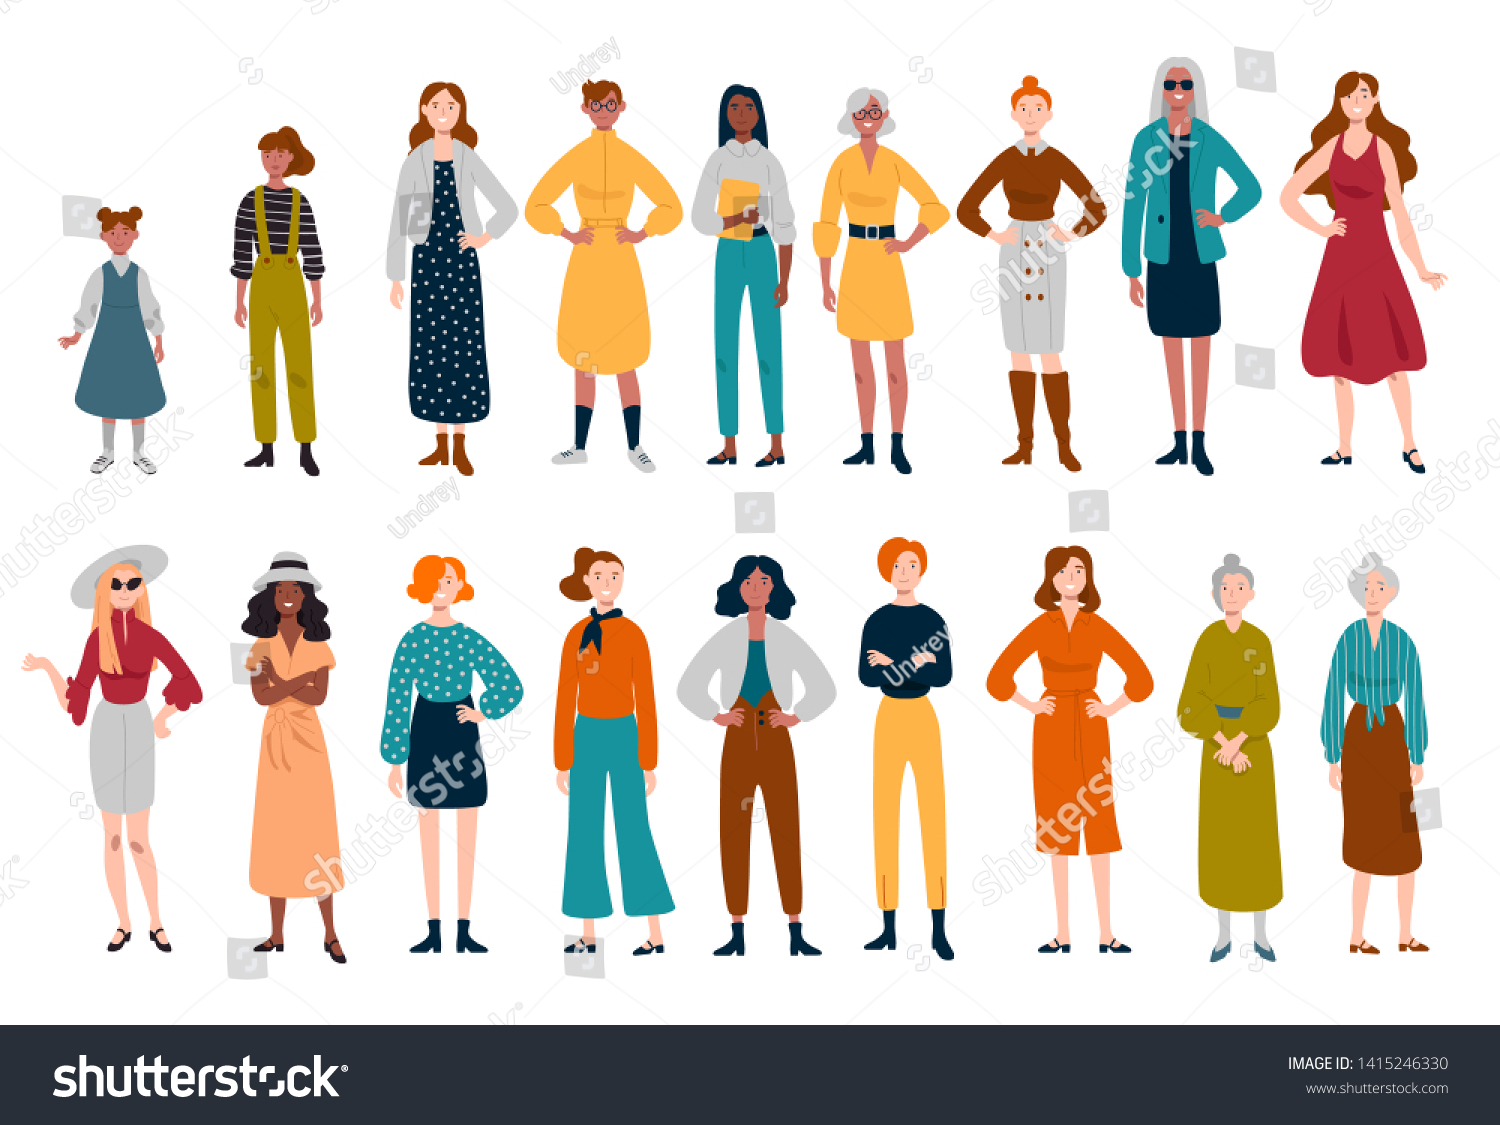 Women Many Female Characters Different Ages Stock Vector (Royalty Free ...